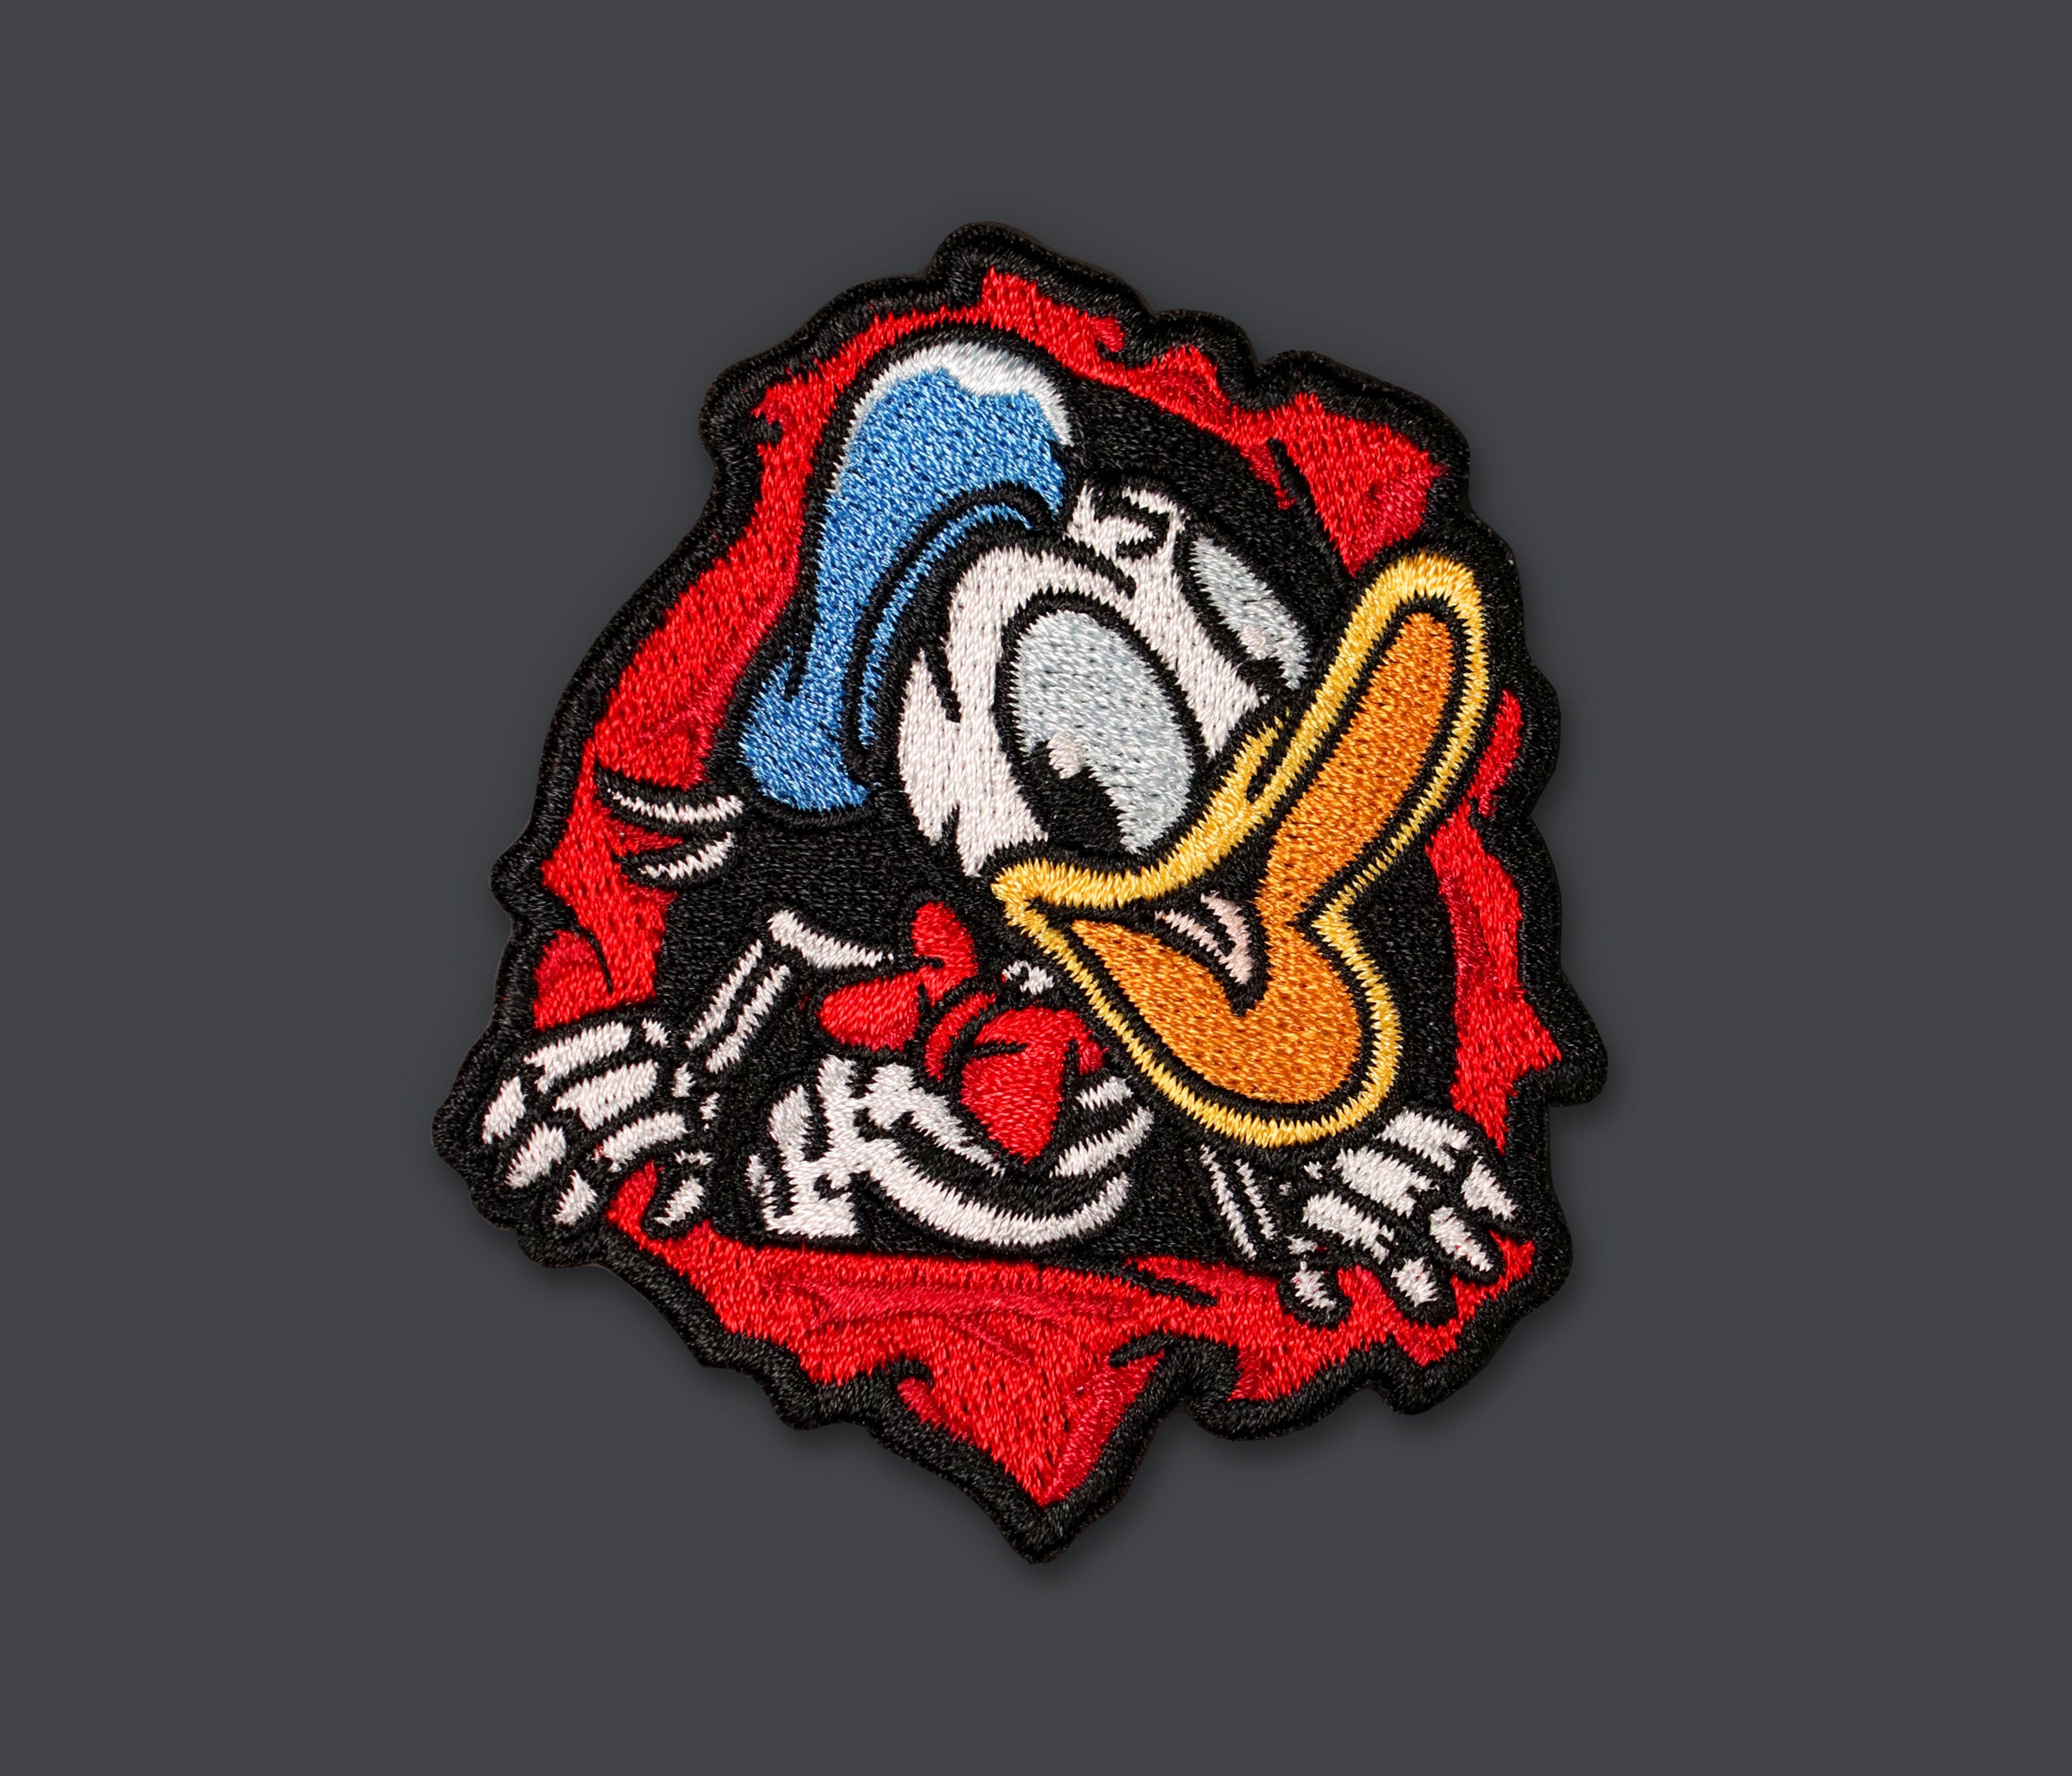 Muppets Rizzo the Rat Multicam Morale Patch